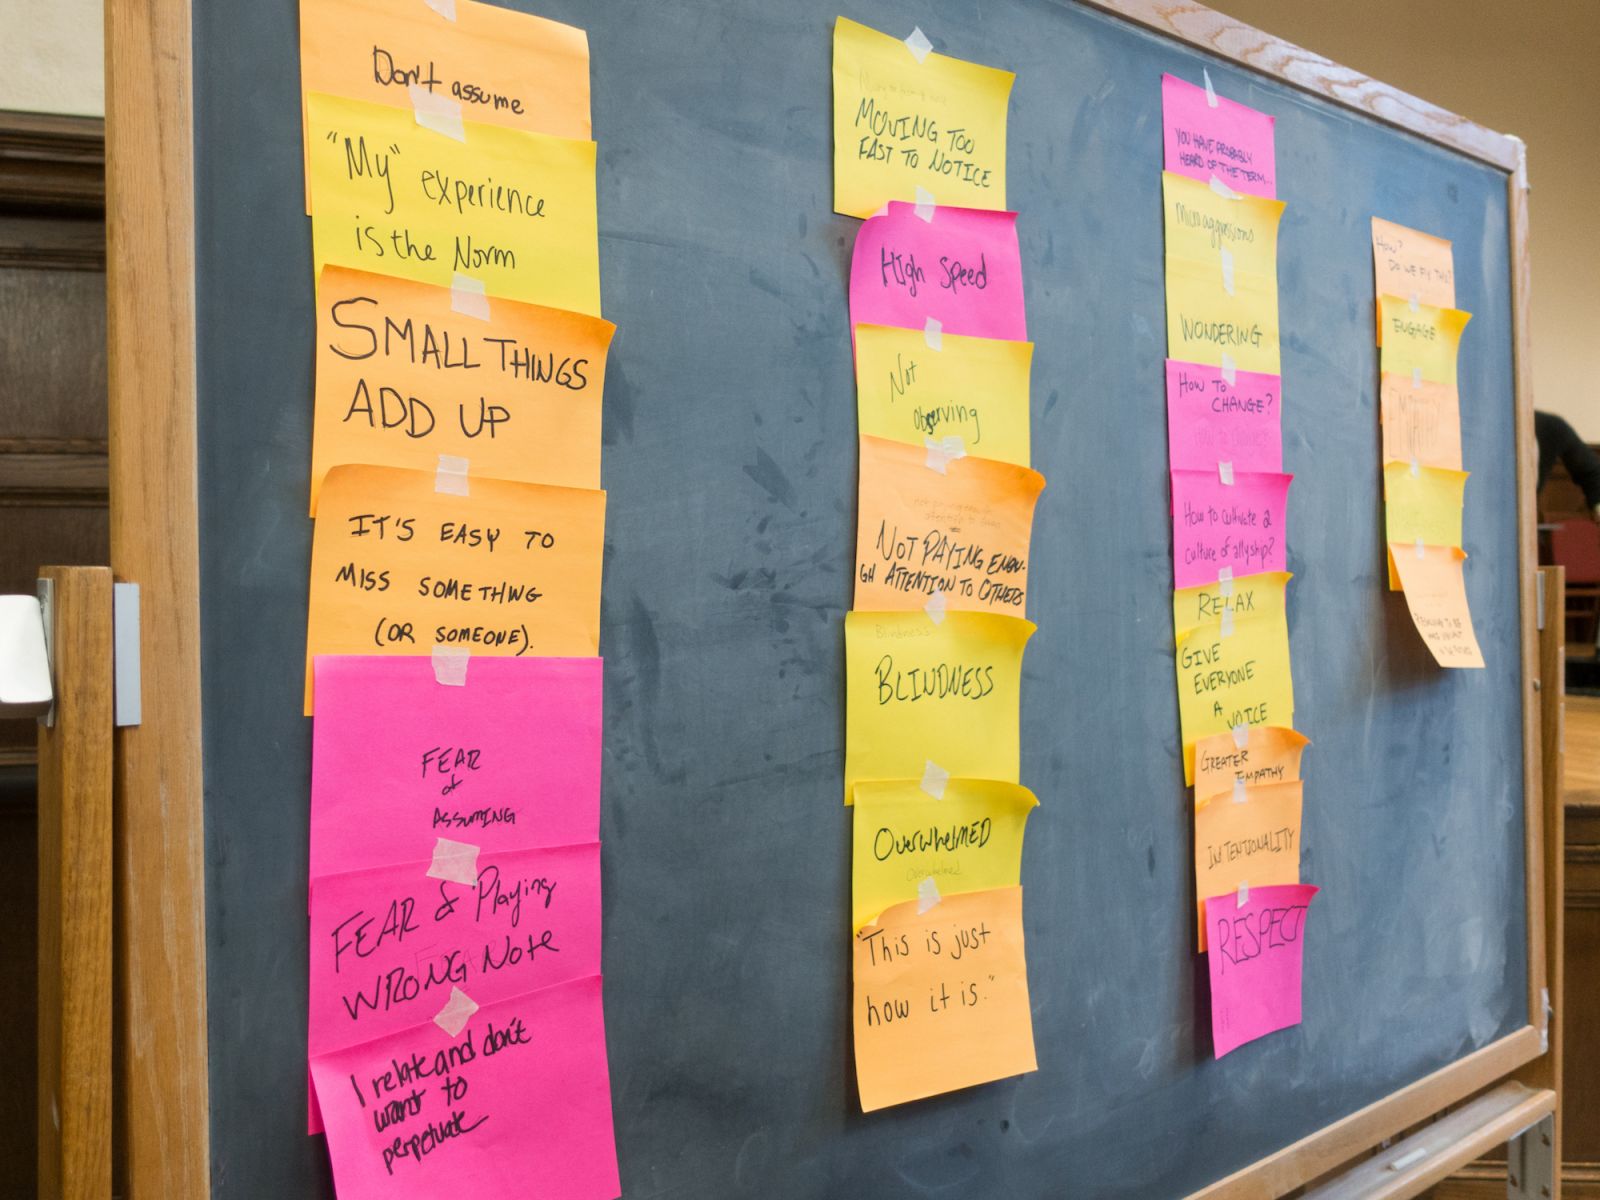 Crowd-sourced poems appear on sticky notes after the theatre performance ended